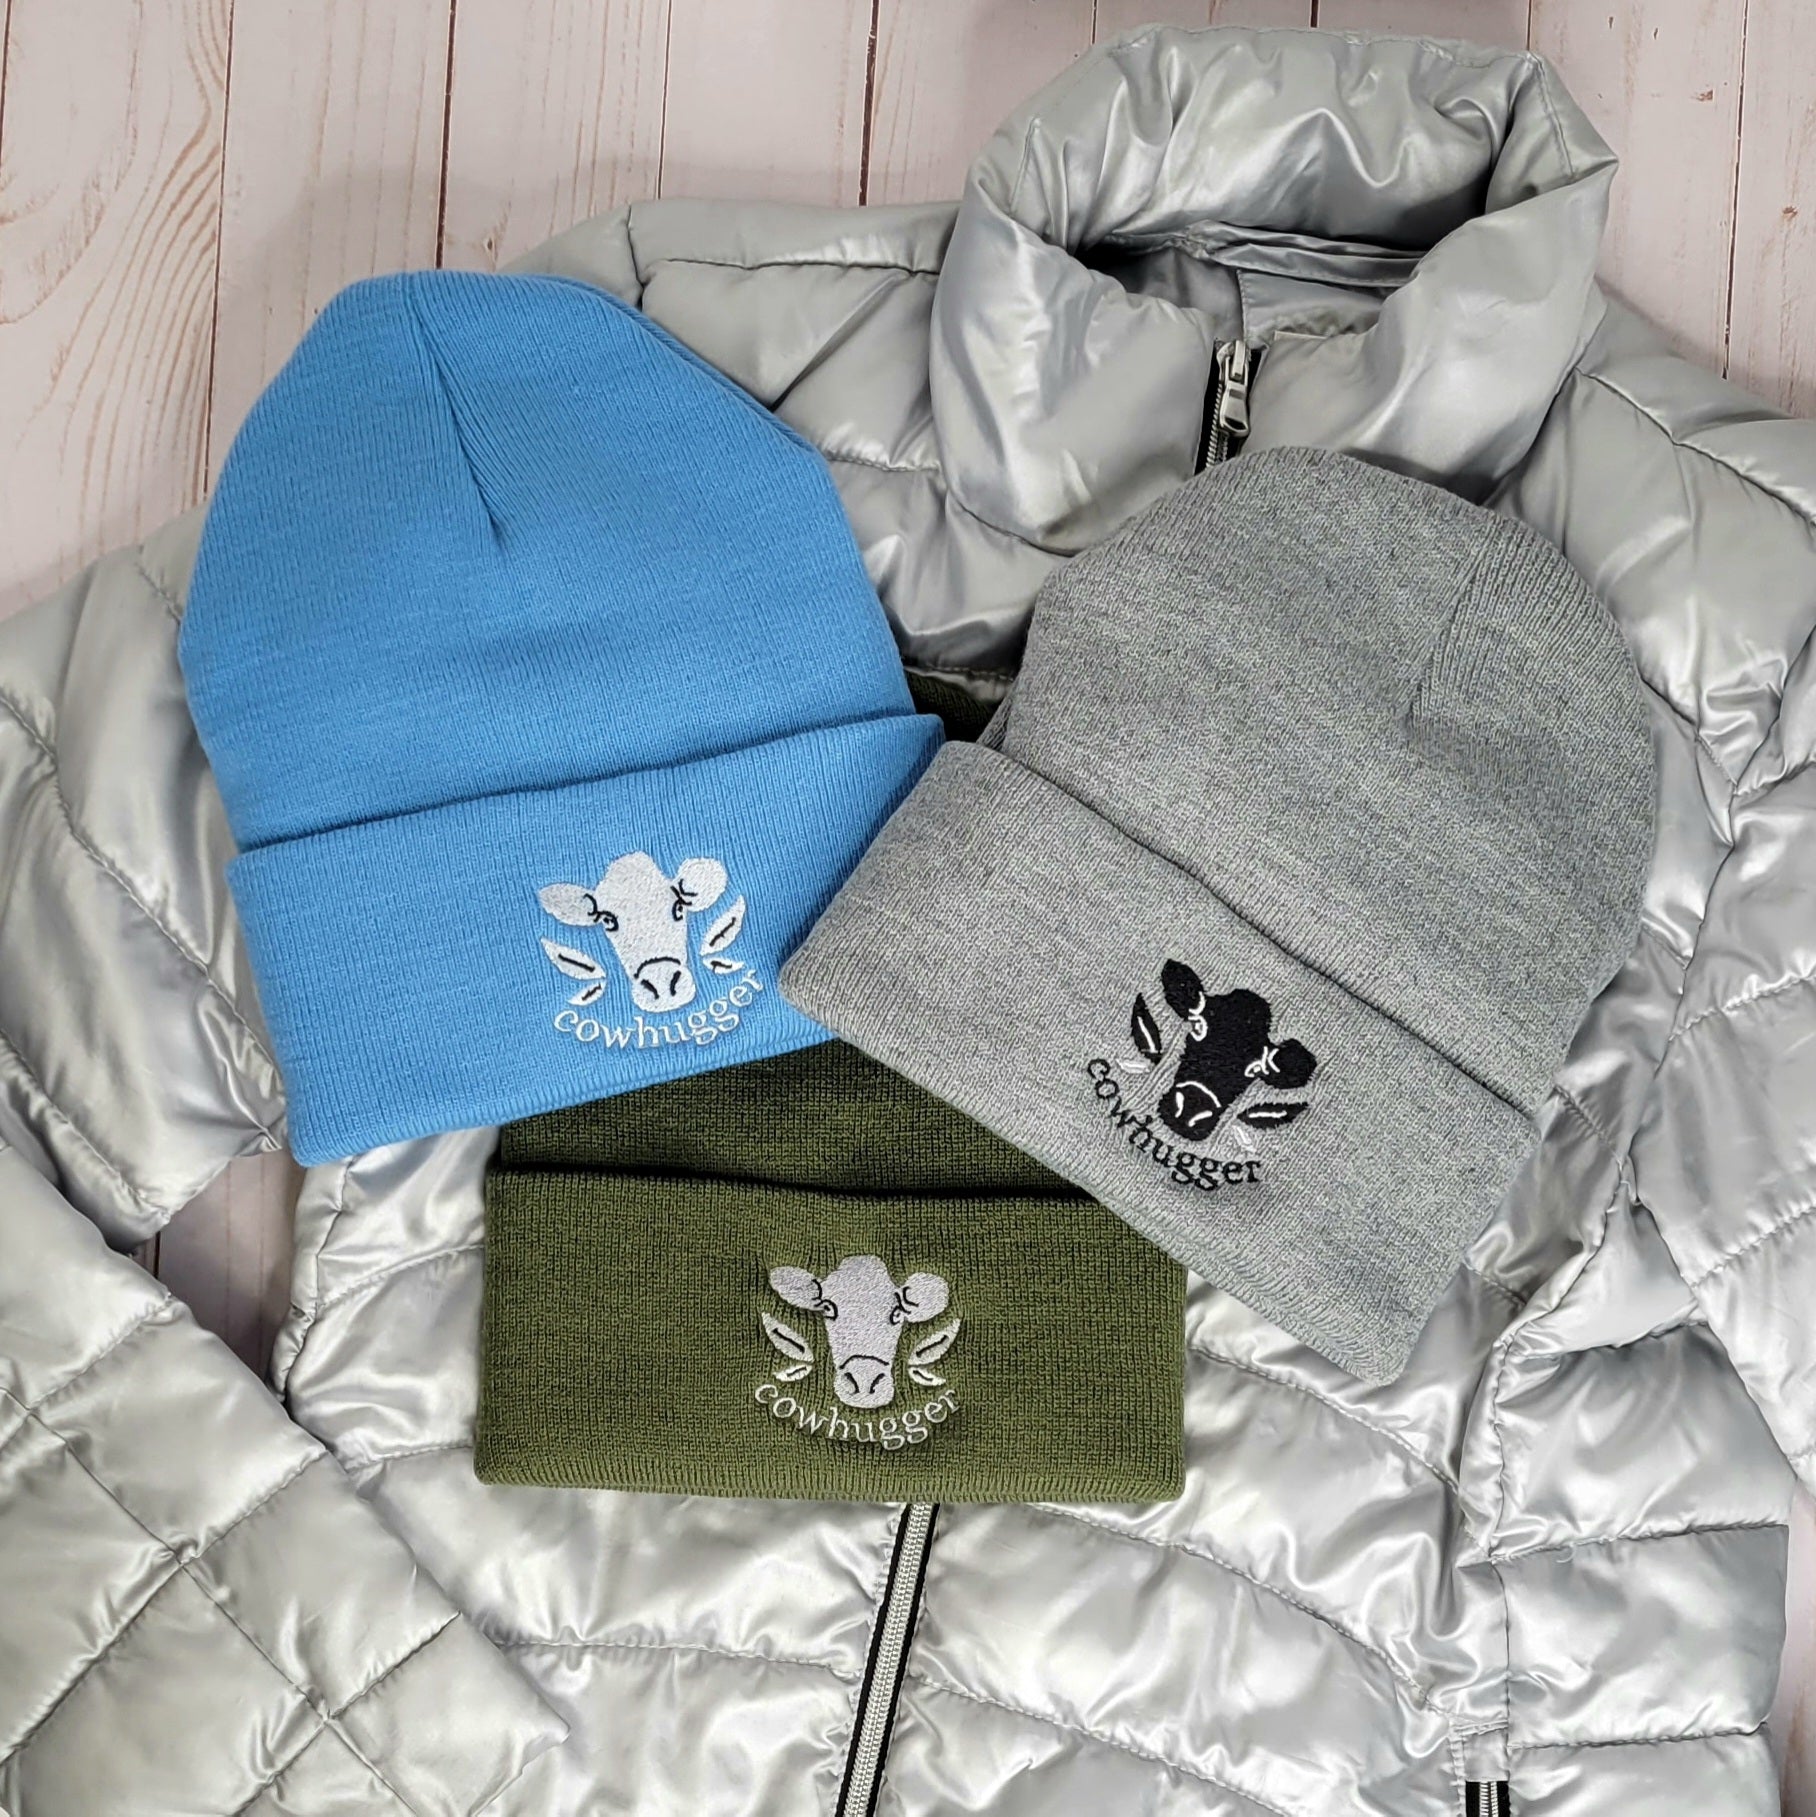 Three embroidered Cowhugger cuffed beanies lying on a winter puffer jacket.  Light blue beanie with white logo, gray beanie with black and white logo, and military green beanie with silver logo.